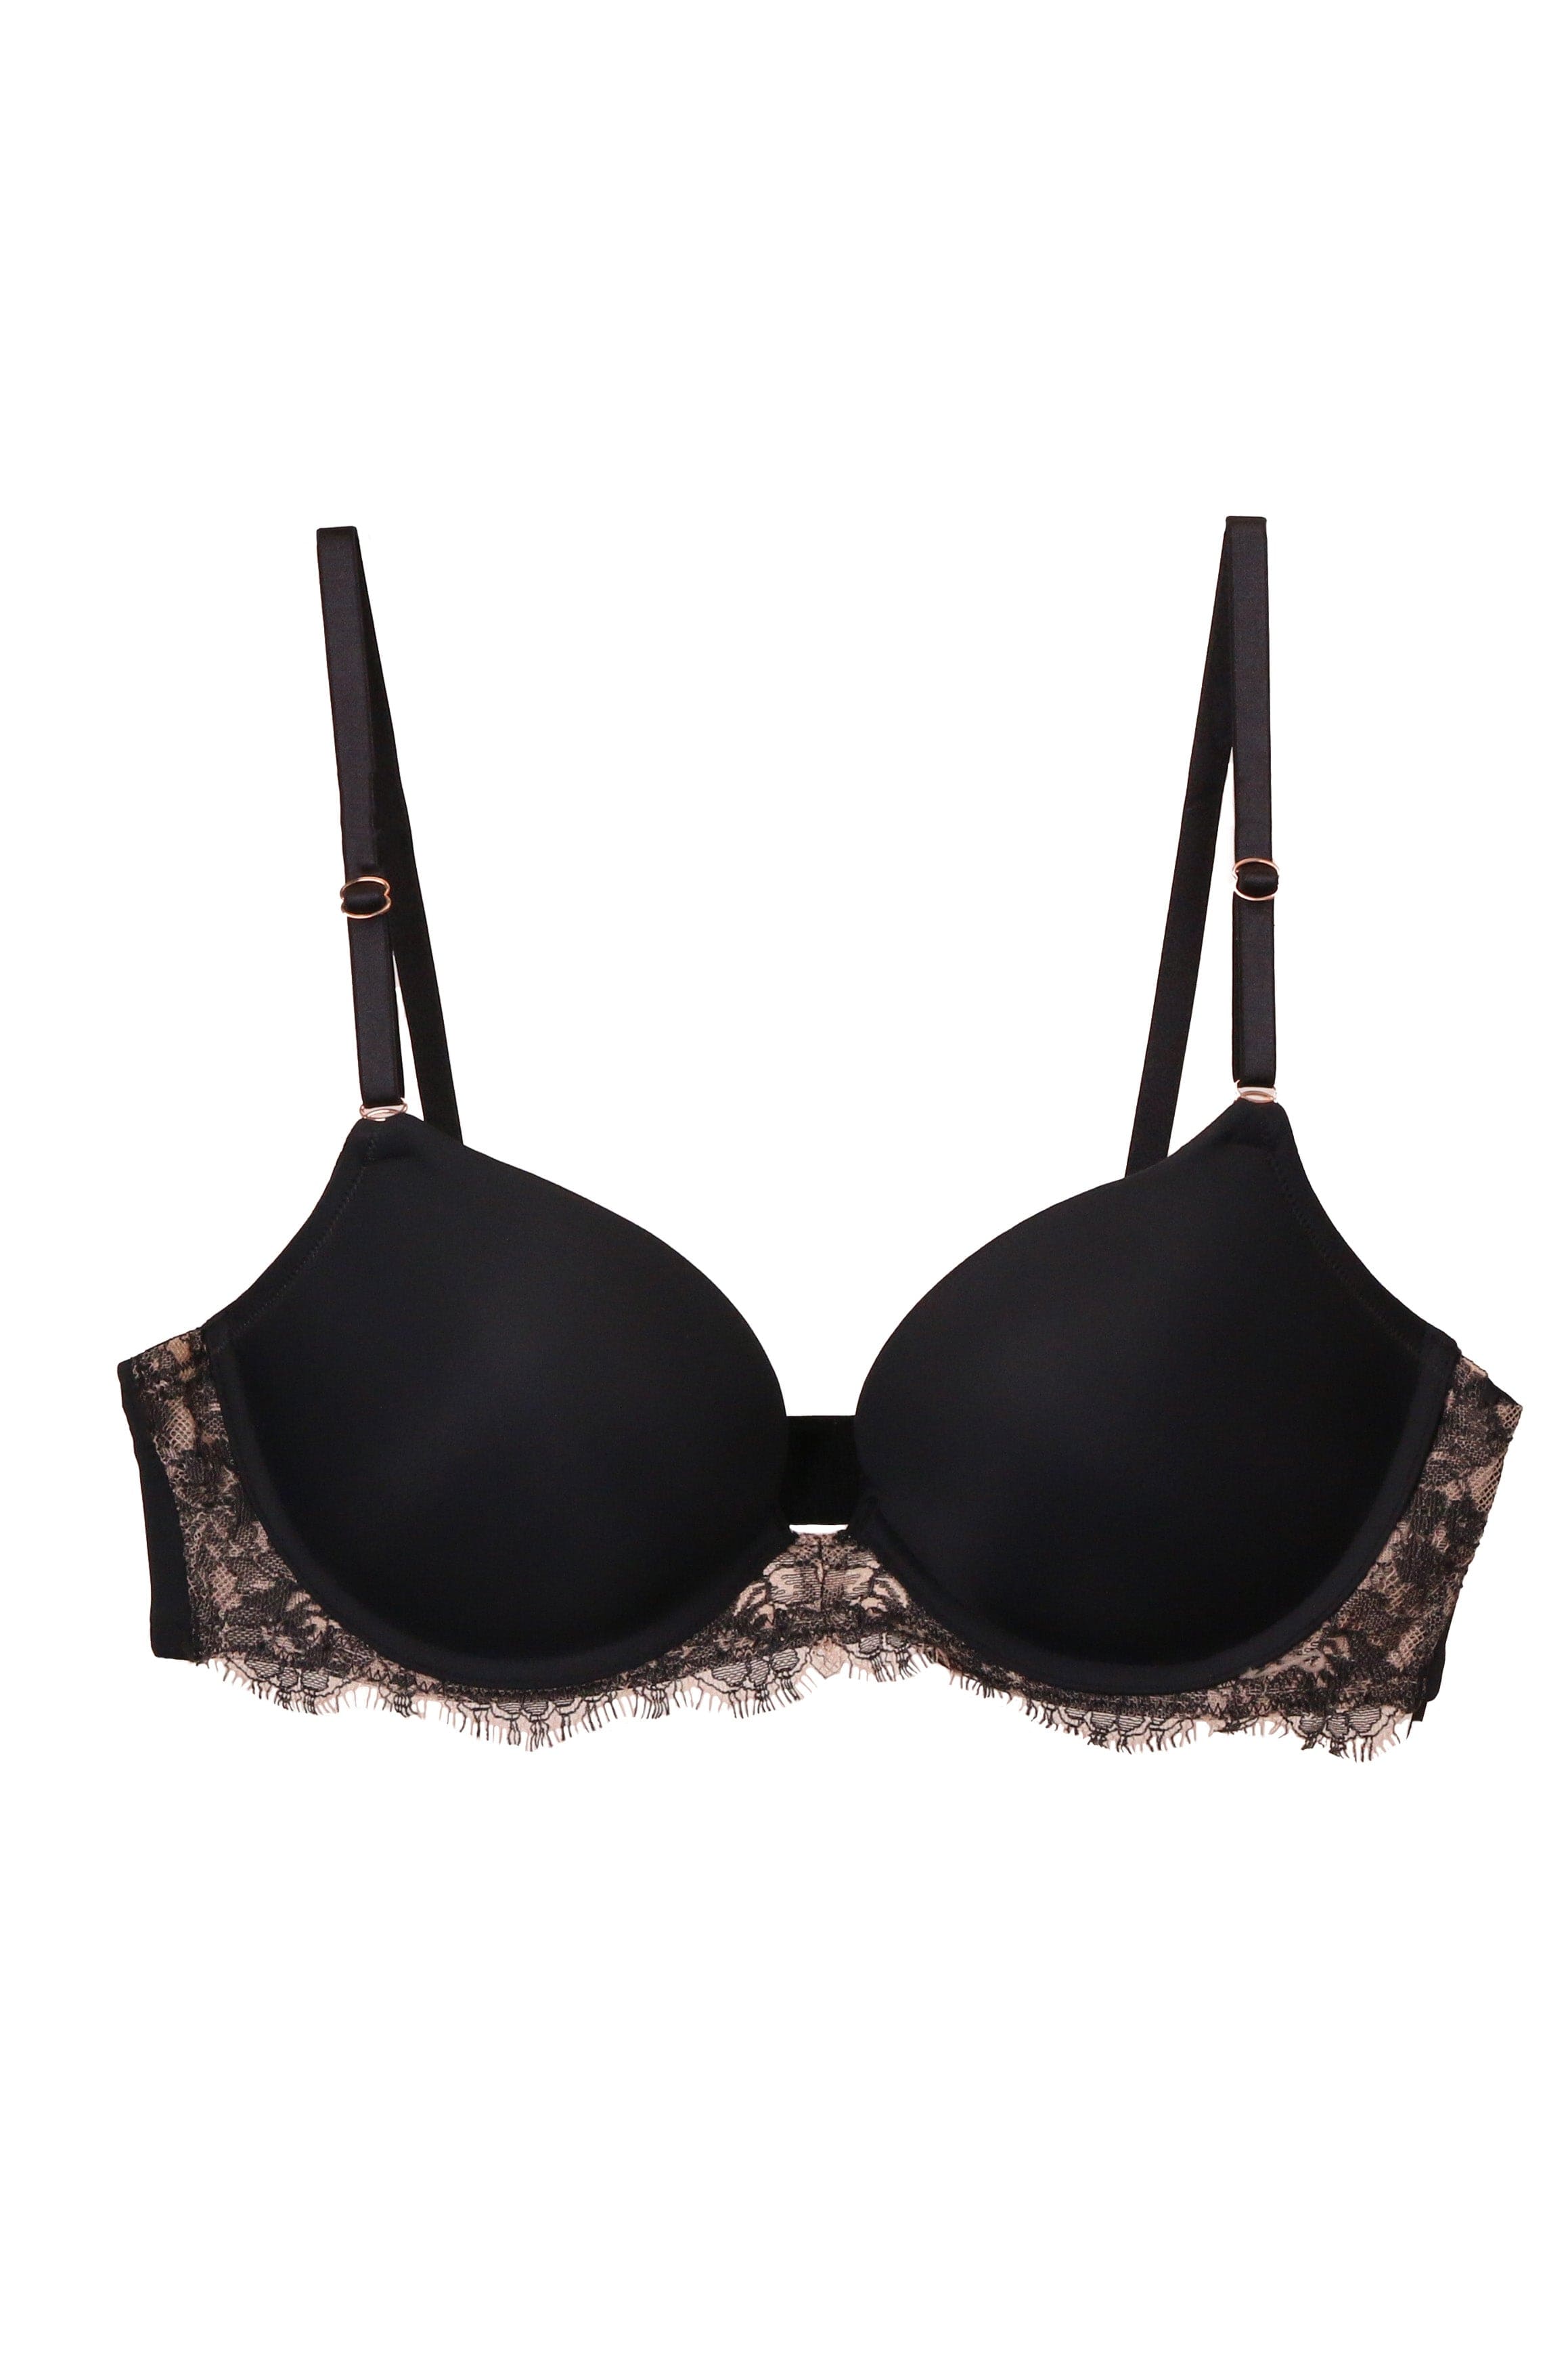 Buy PrettyCat Black Lace Lace Bra For Women(PC-BR-6037A) Online at